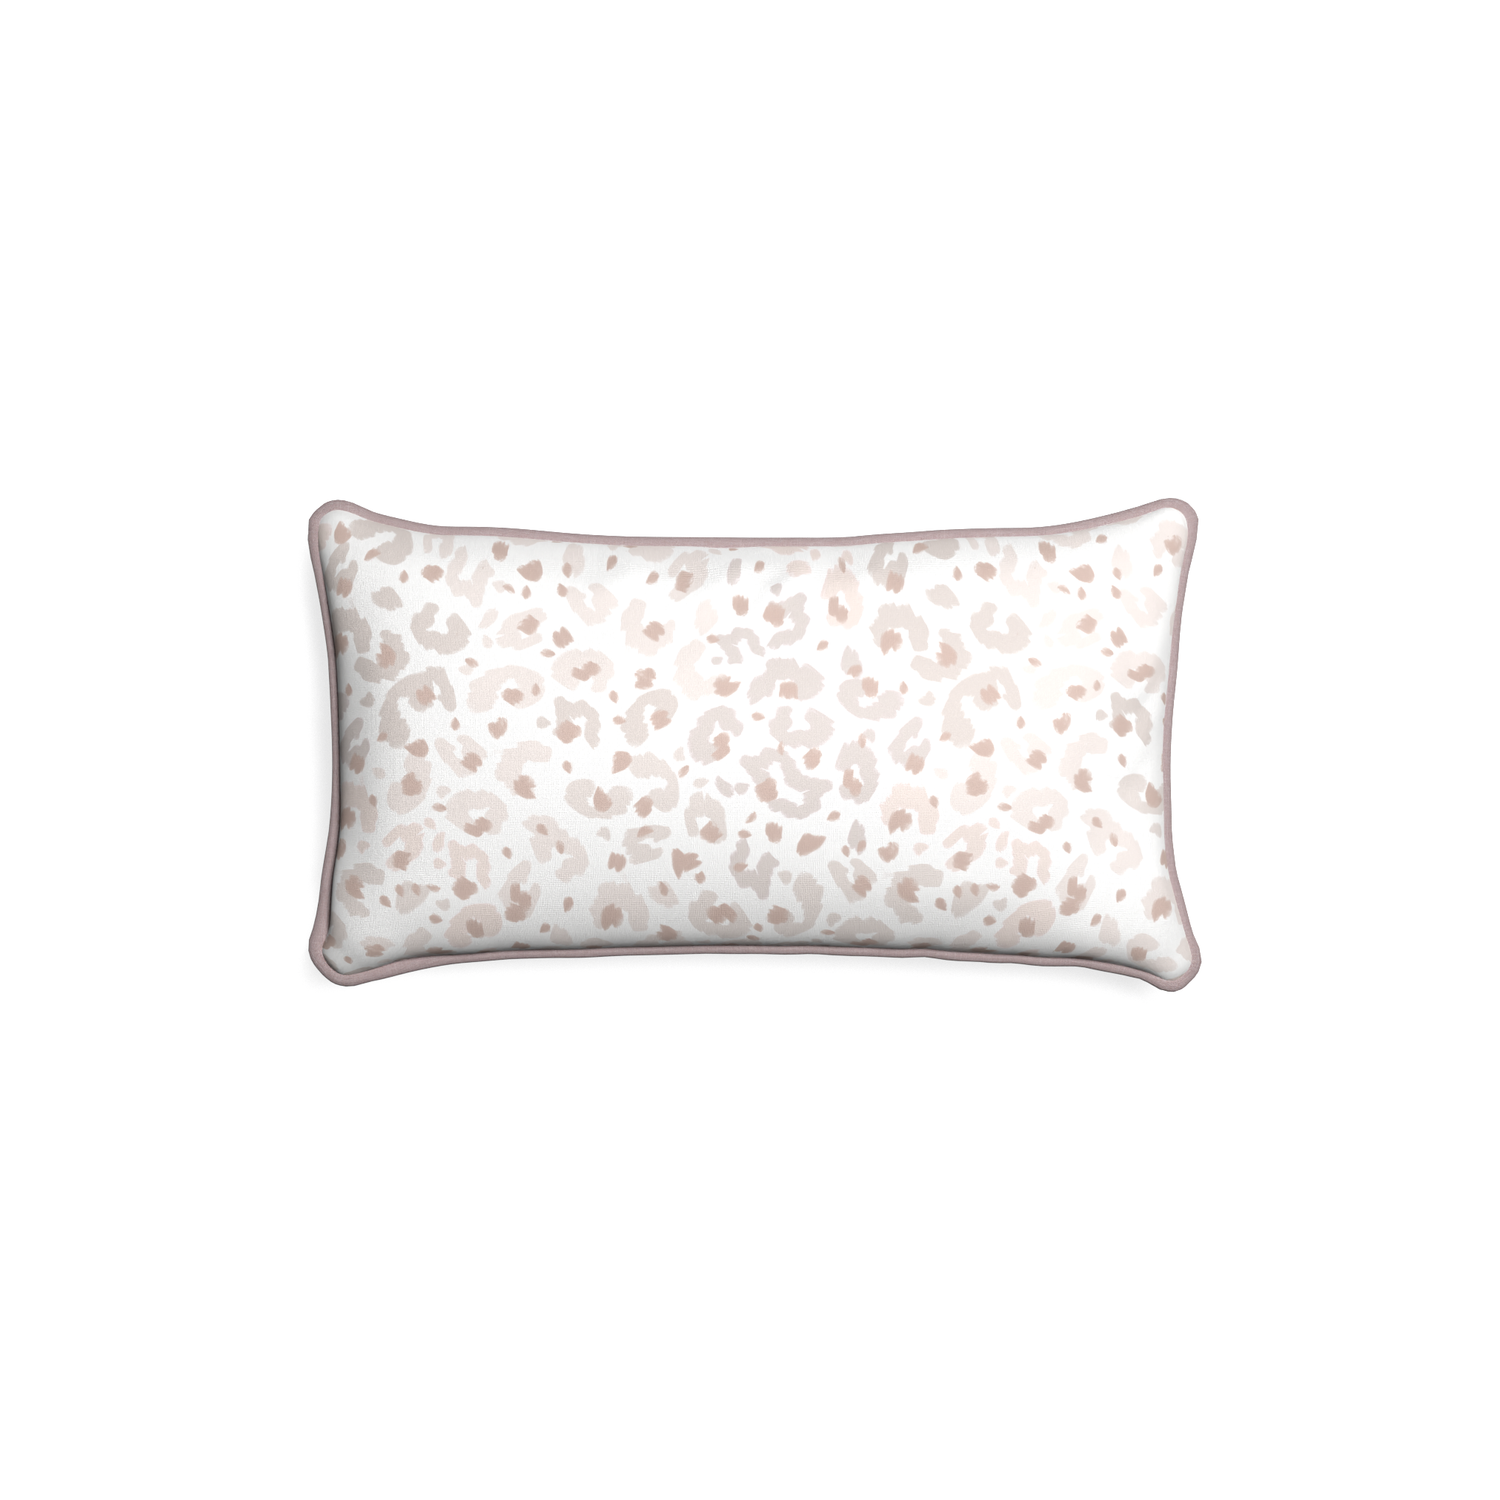 Petite-lumbar rosie custom beige animal printpillow with orchid piping on white background